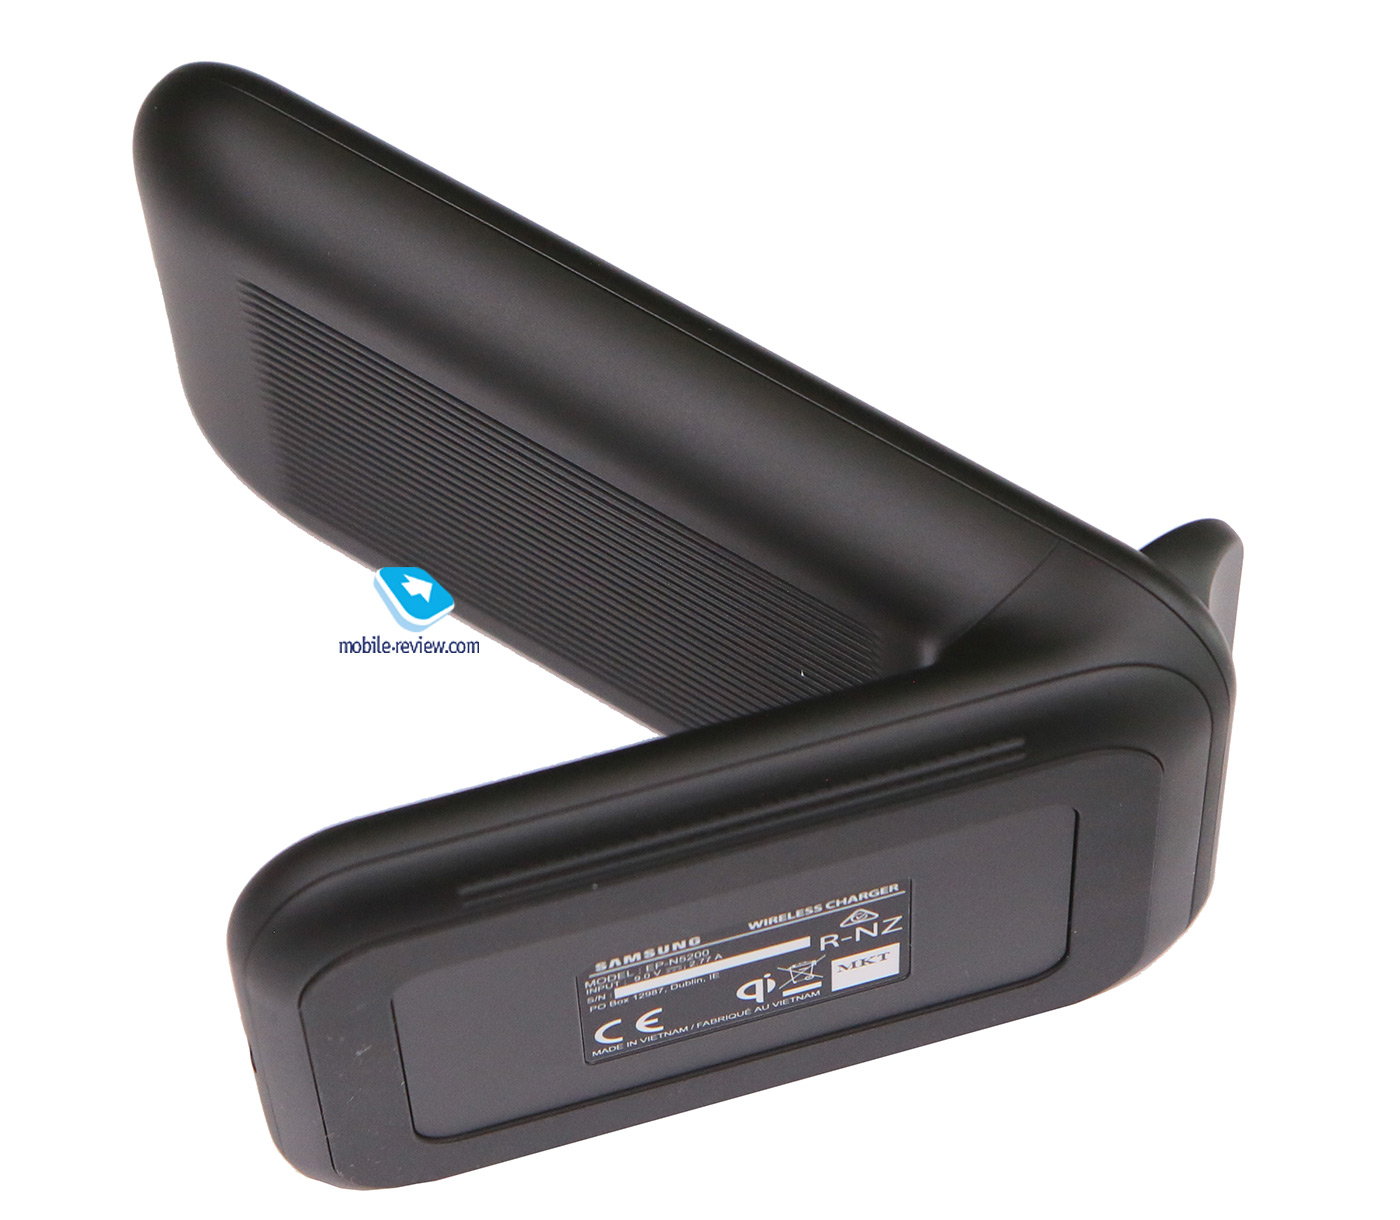     15   Samsung Charger Stand (EP-N5200)